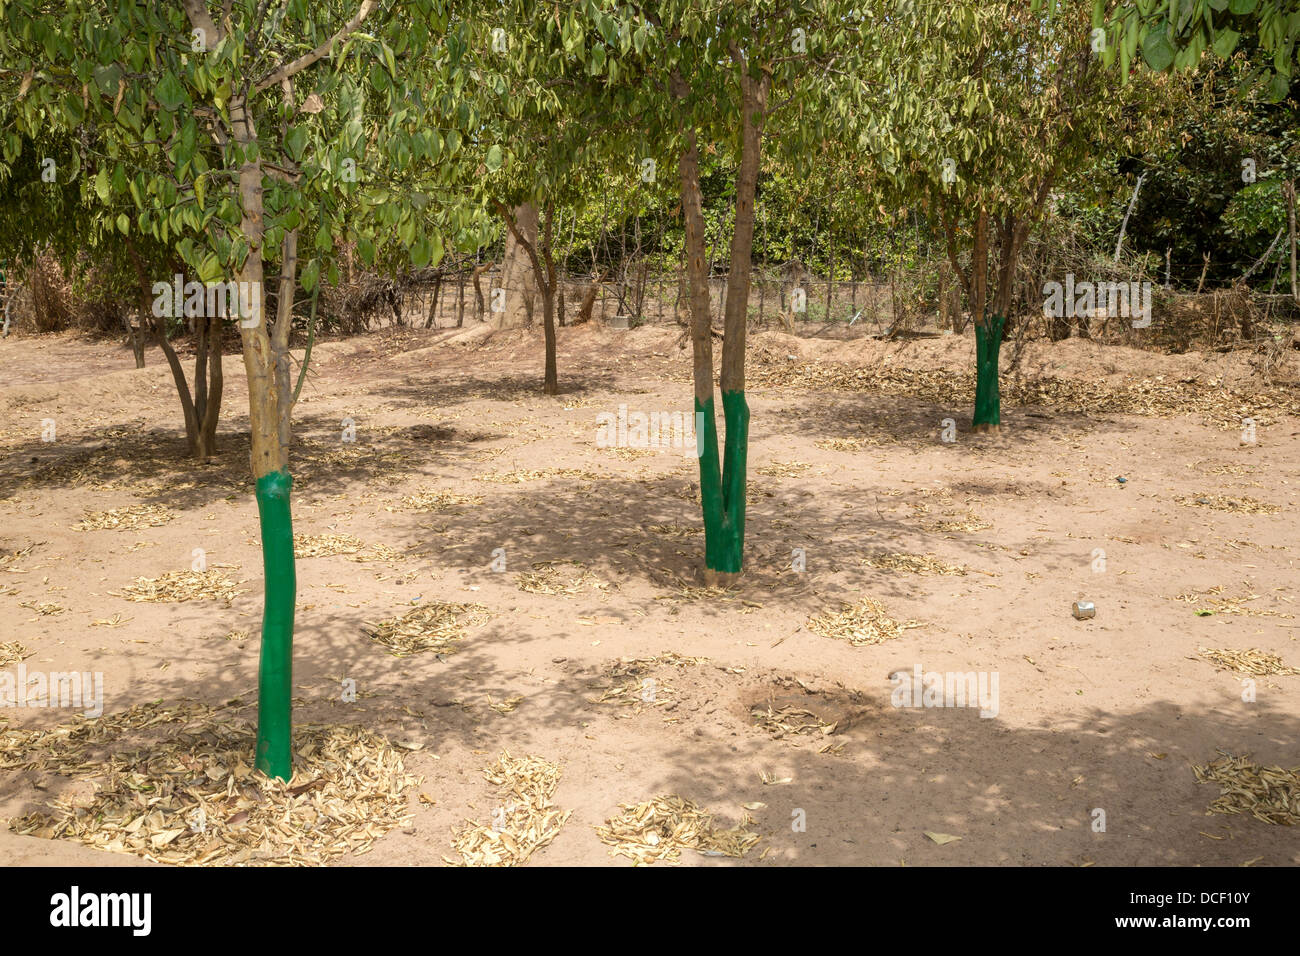 Termite Protection. Green Paint Protects Trunks from Attack by Termites. Mendy Kunda, North Bank Region, The Gambia Stock Photo